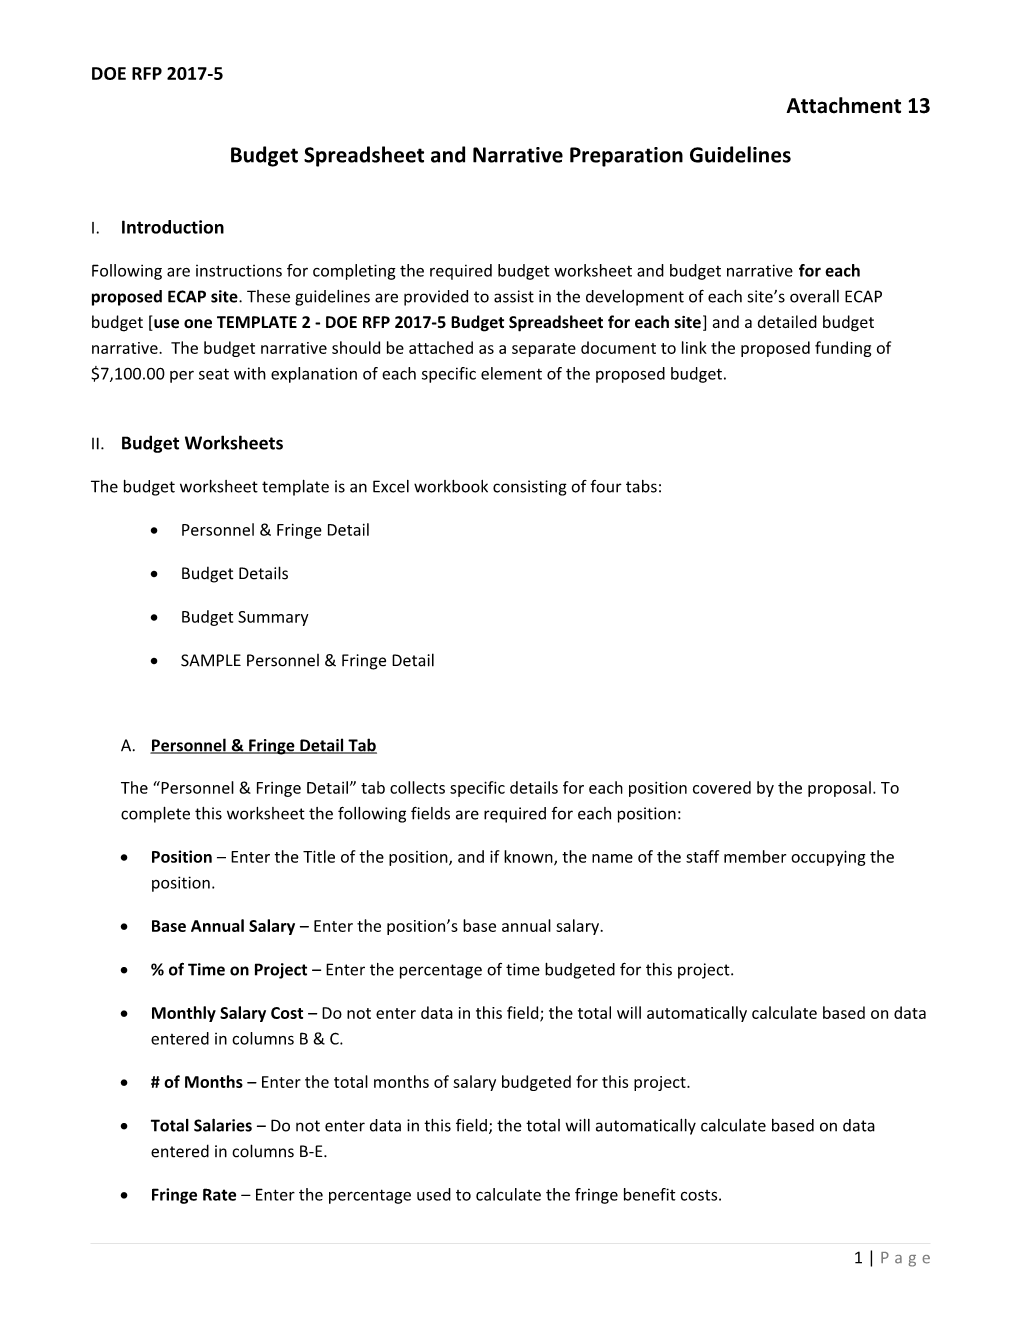 Budget Spreadsheet and Narrative Preparation Guidelines